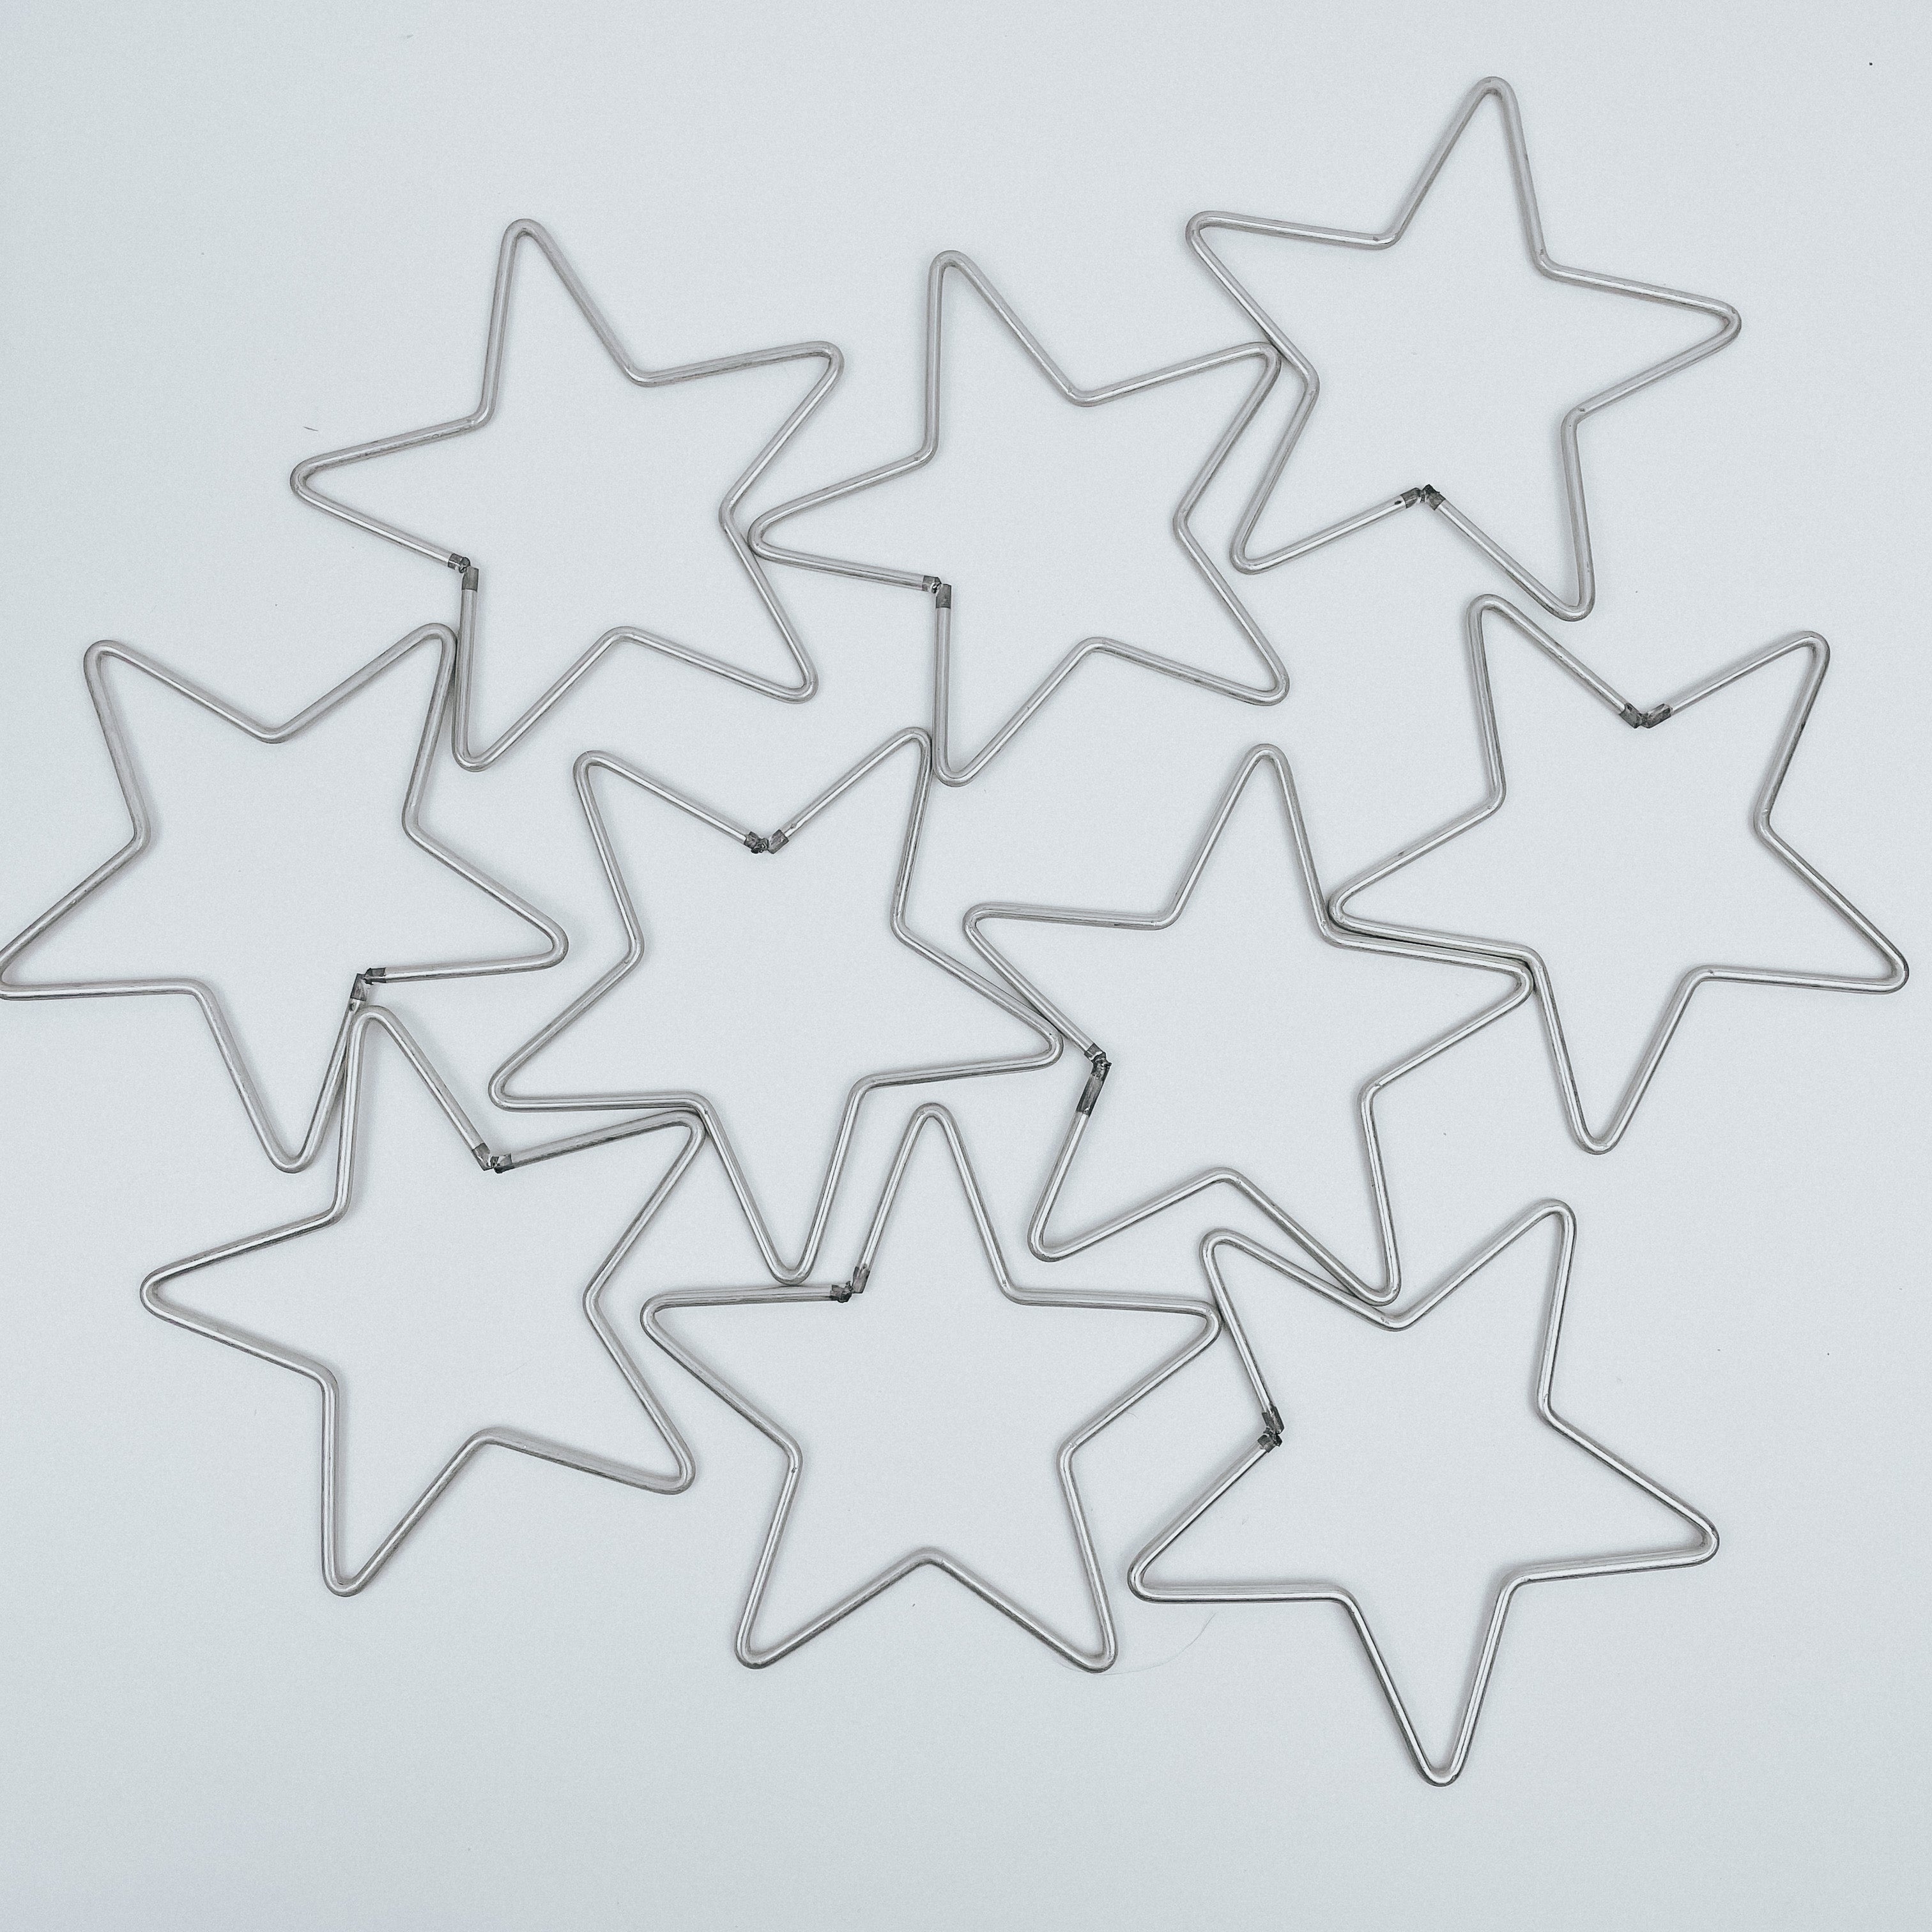 Metal Star Hoops For Christmas Ornaments/ Dreamcatchers - Many sizes